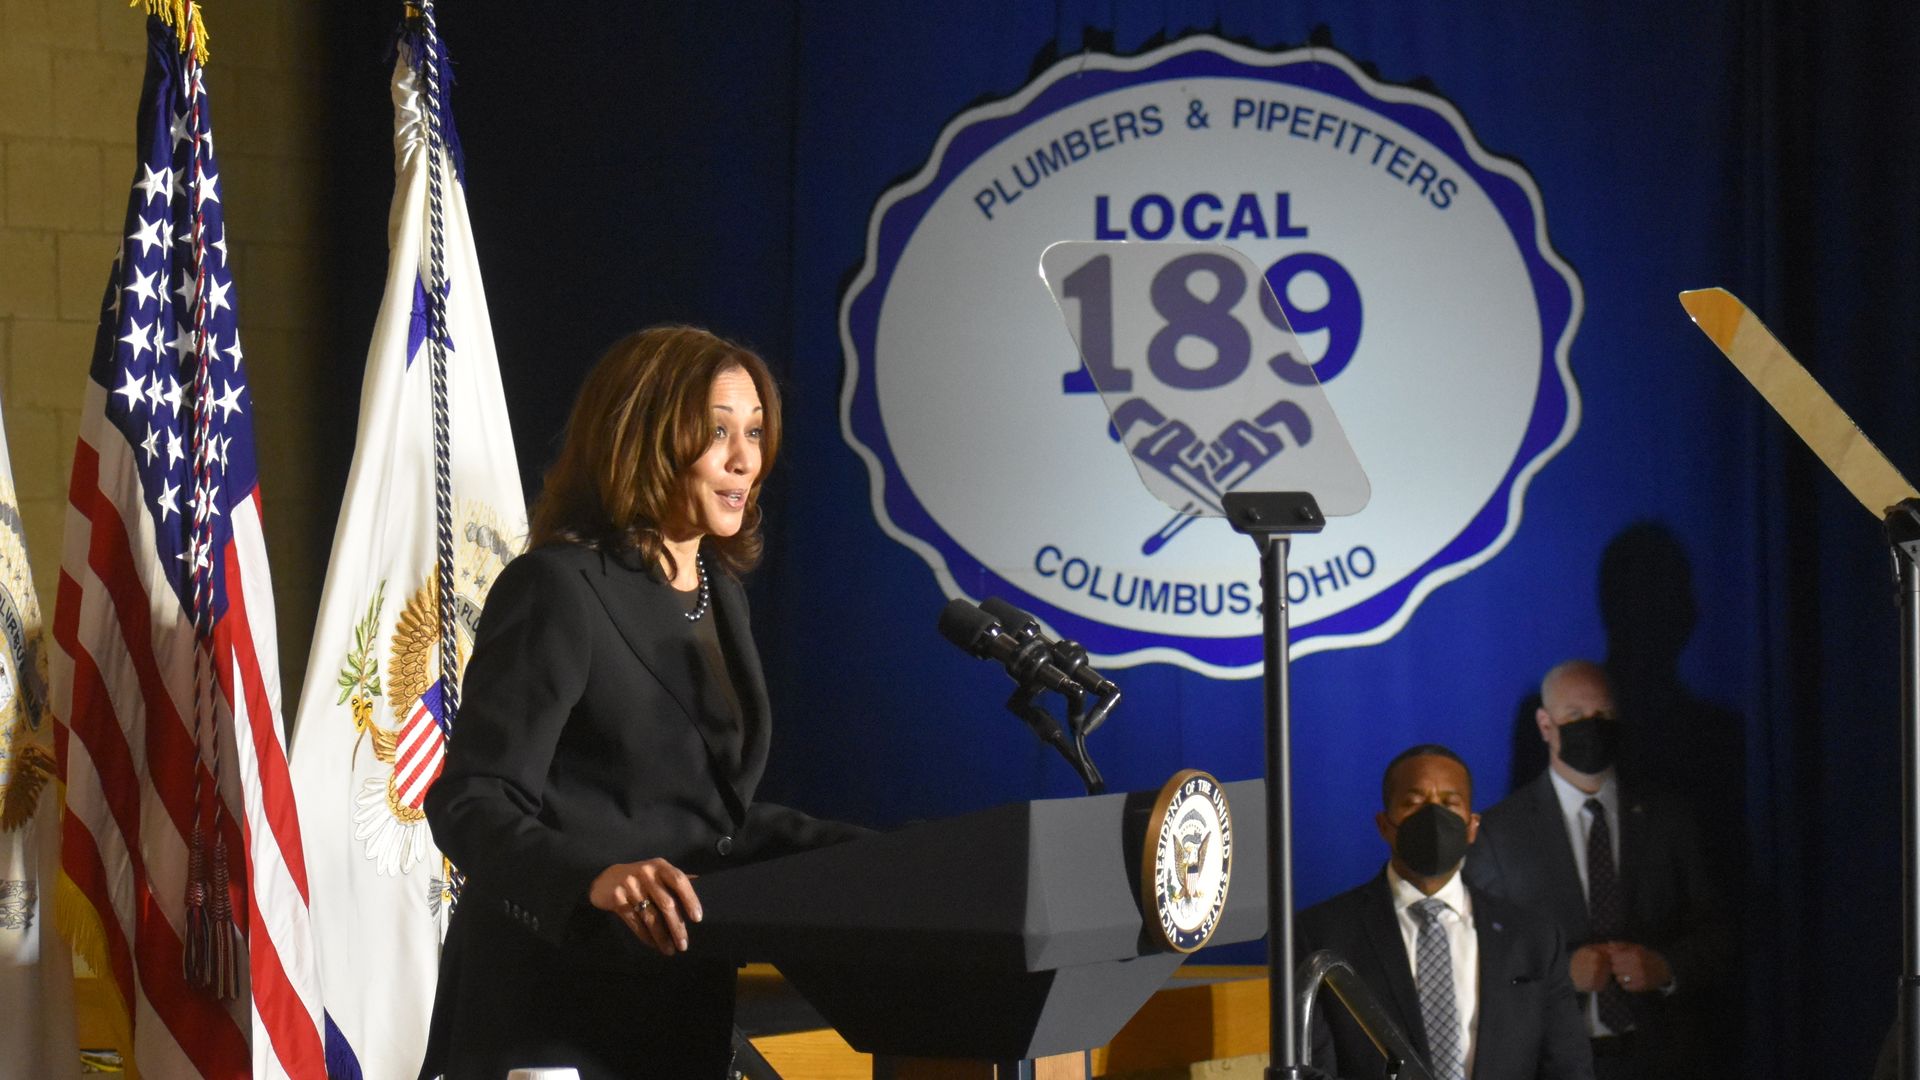 Vice President Kamala Harris speaks at a Columbus union hall with a large display of the union's logo on the side wall.